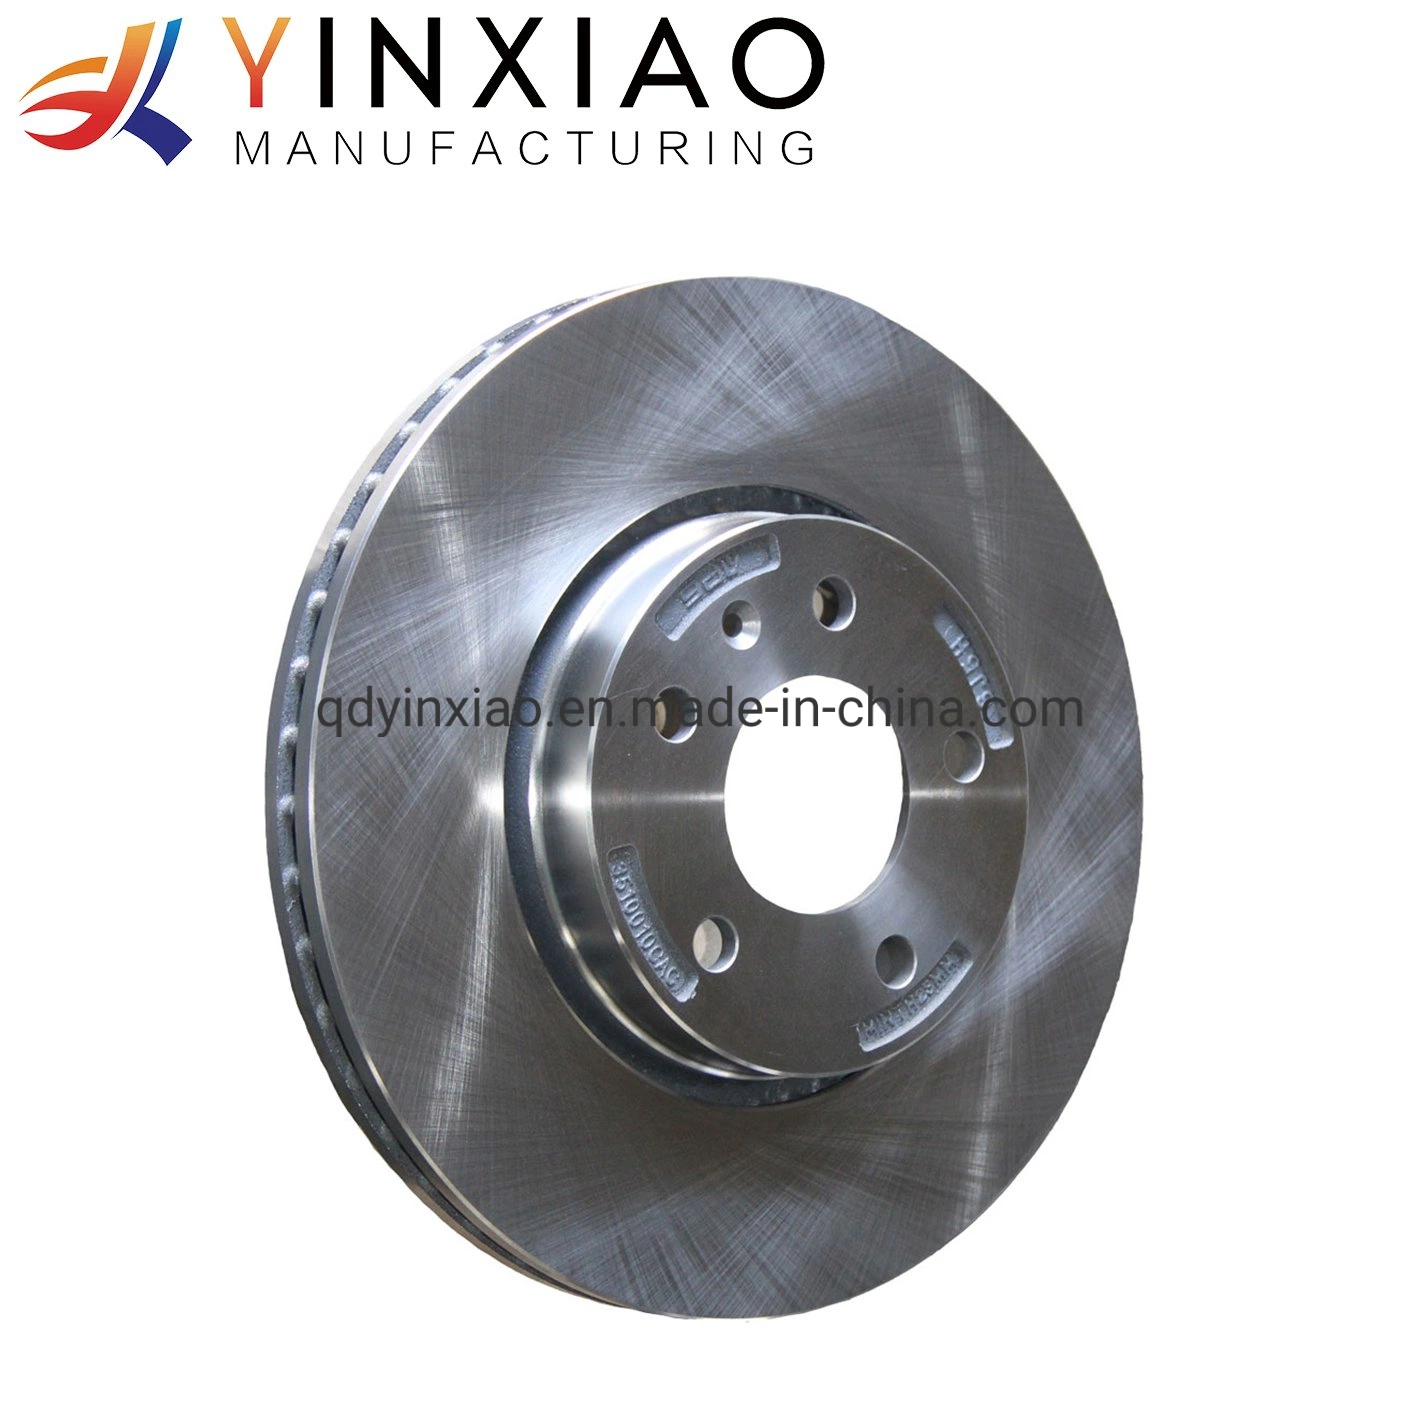 Steel Wheels Are Used for Automobile Chassis Parts